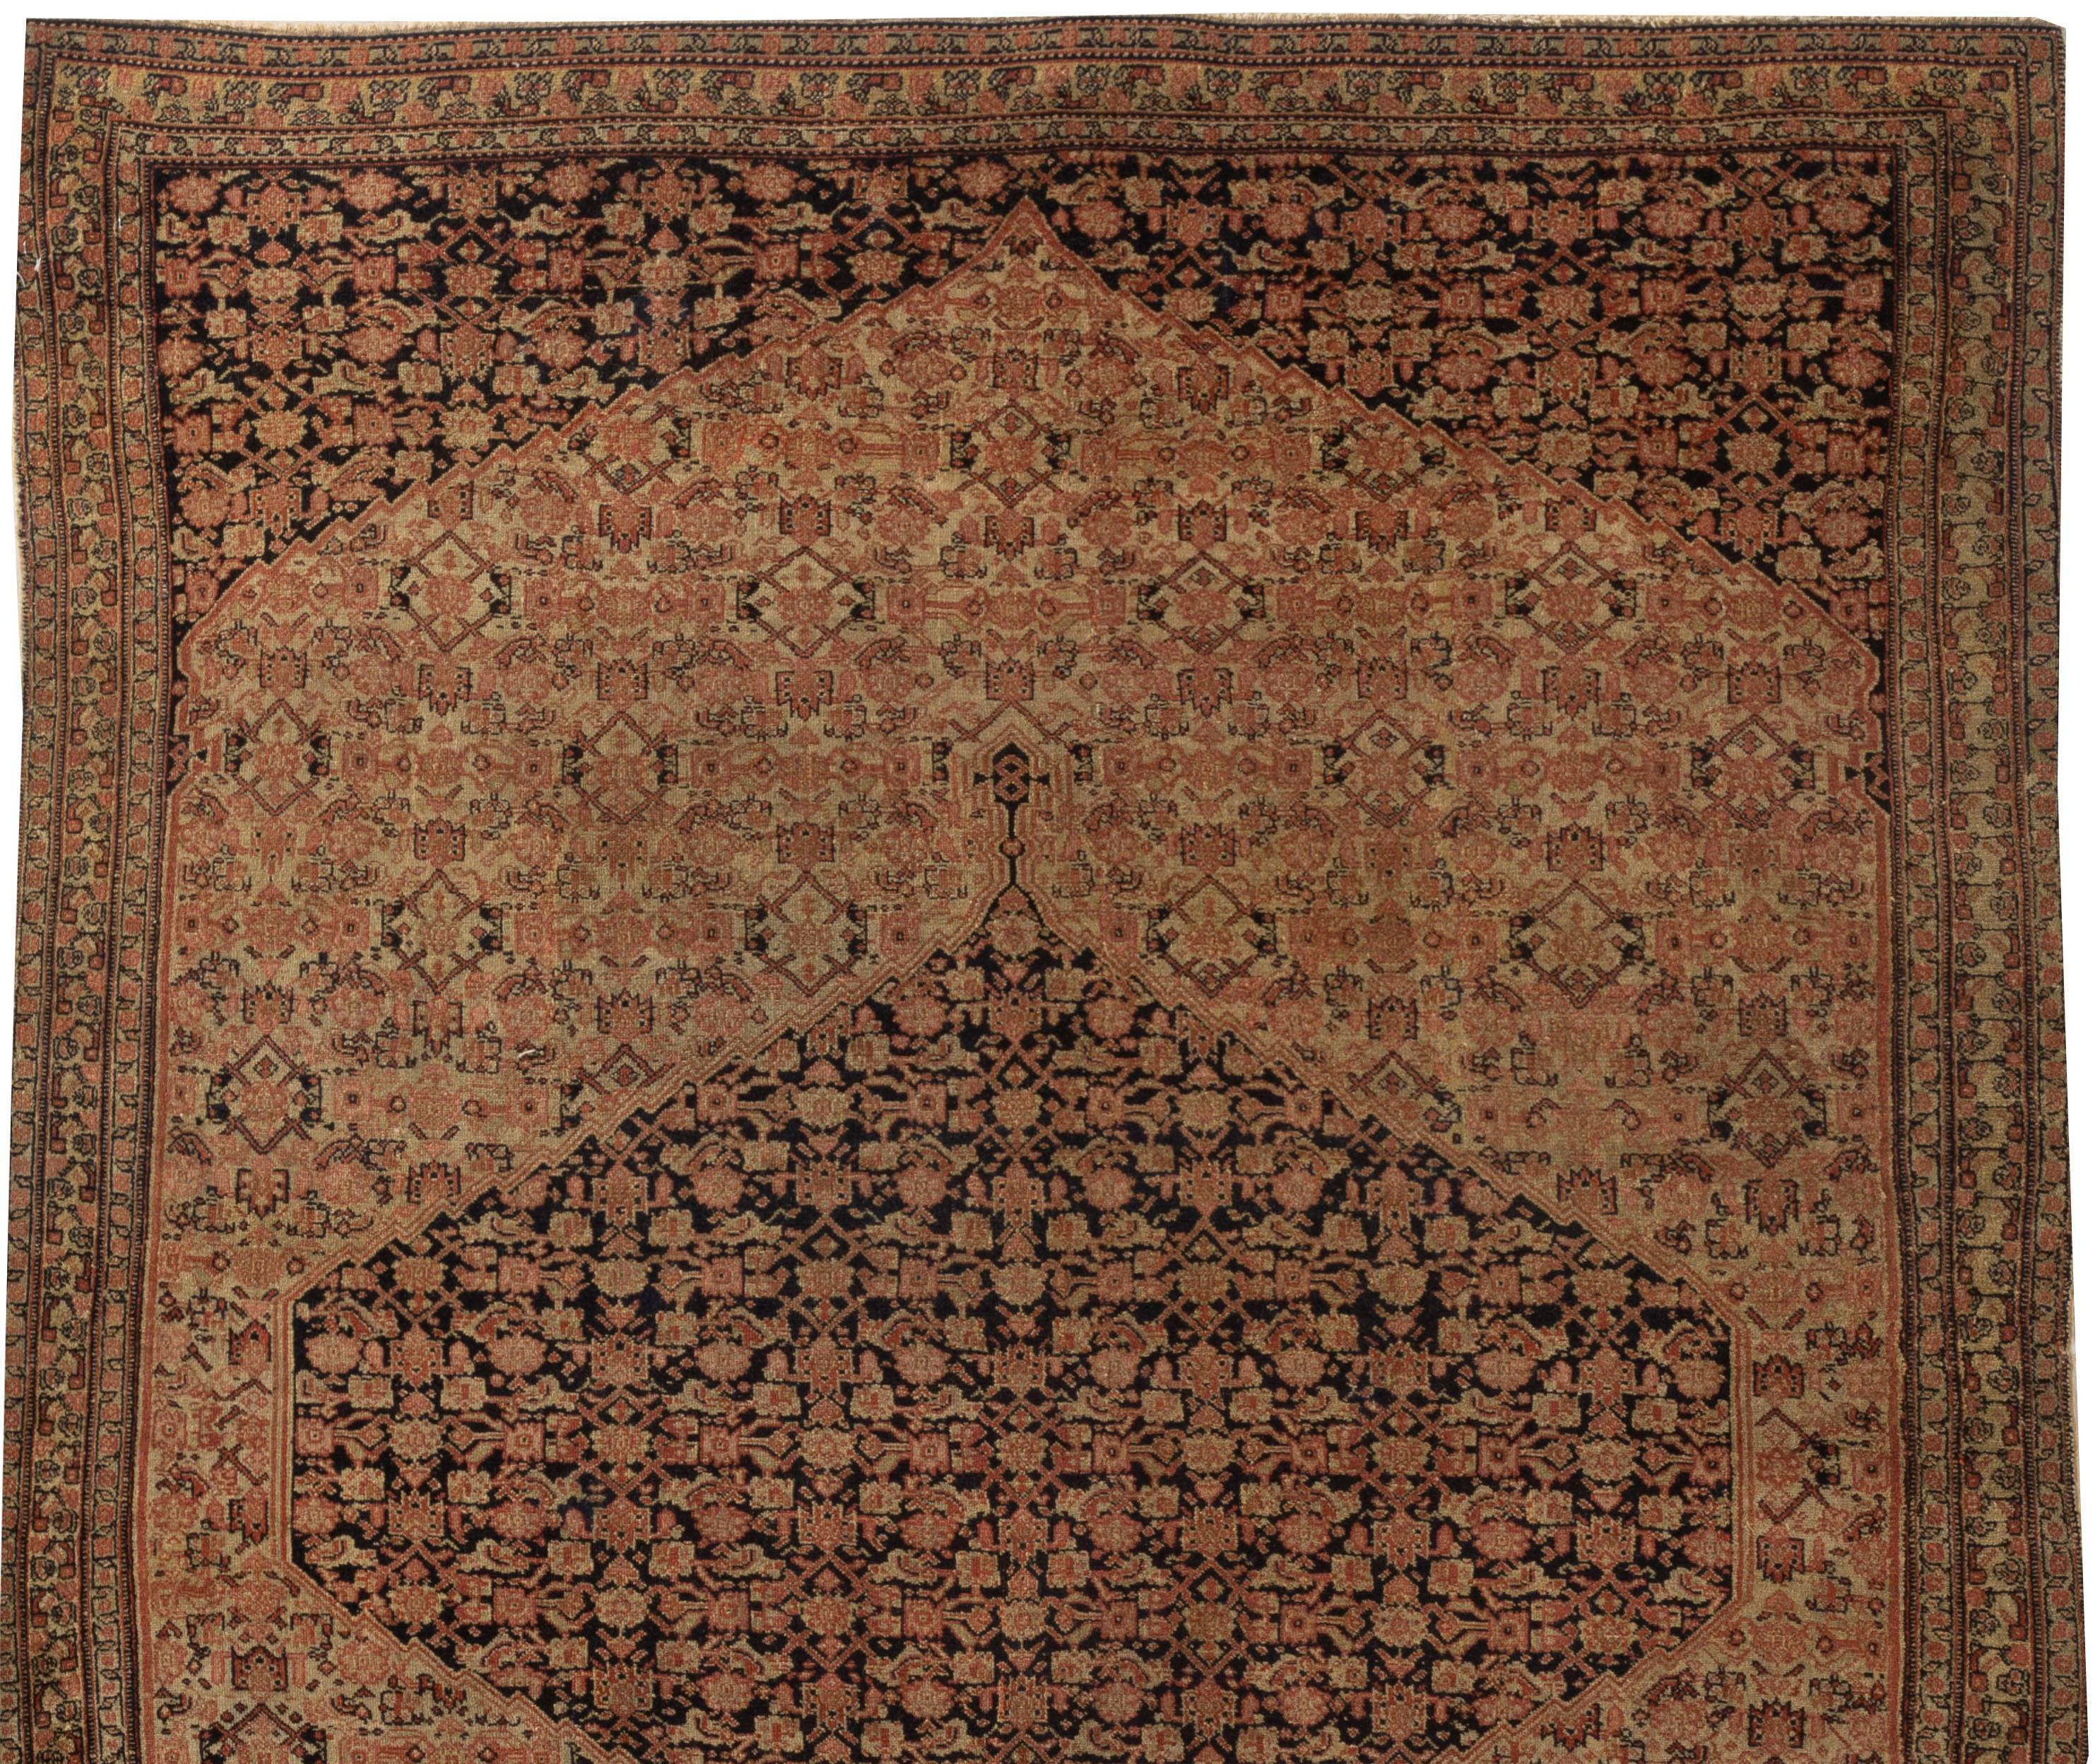 Antique Senneh rug, circa 1880. From the town of Senha (Sanandaj) in Kurdistan come antique rugs that attain nearly miraculous fineness and suppleness. And they are rugs, almost never room sizes or runners. The attention to detail in the weaving in